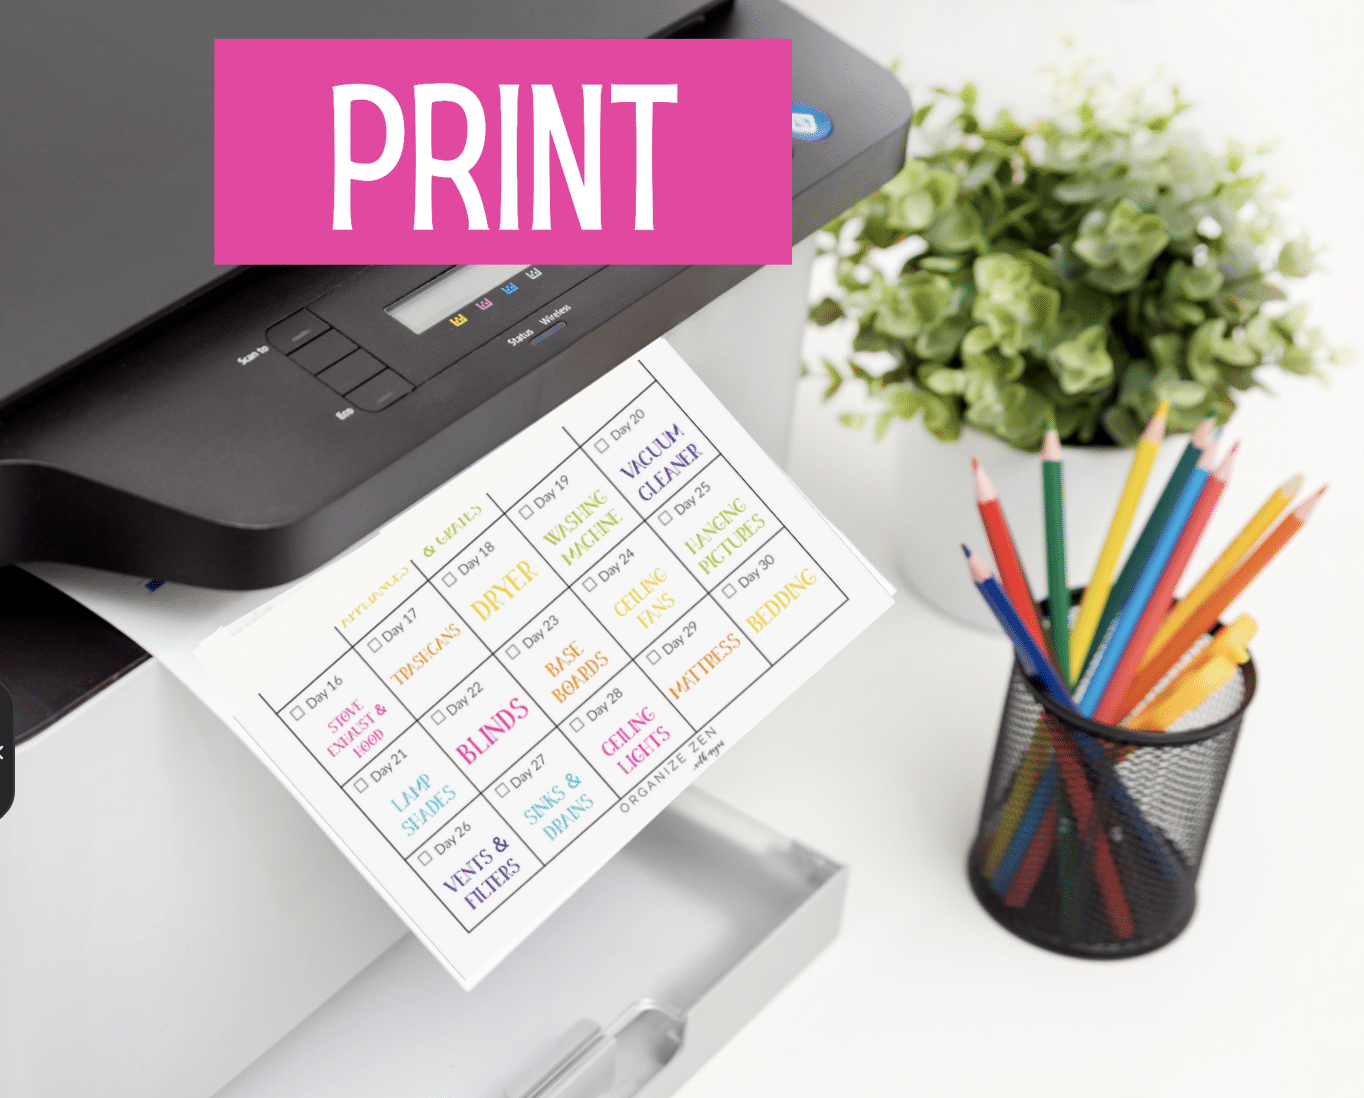 Print 30 Day Spring Cleaning Calendar